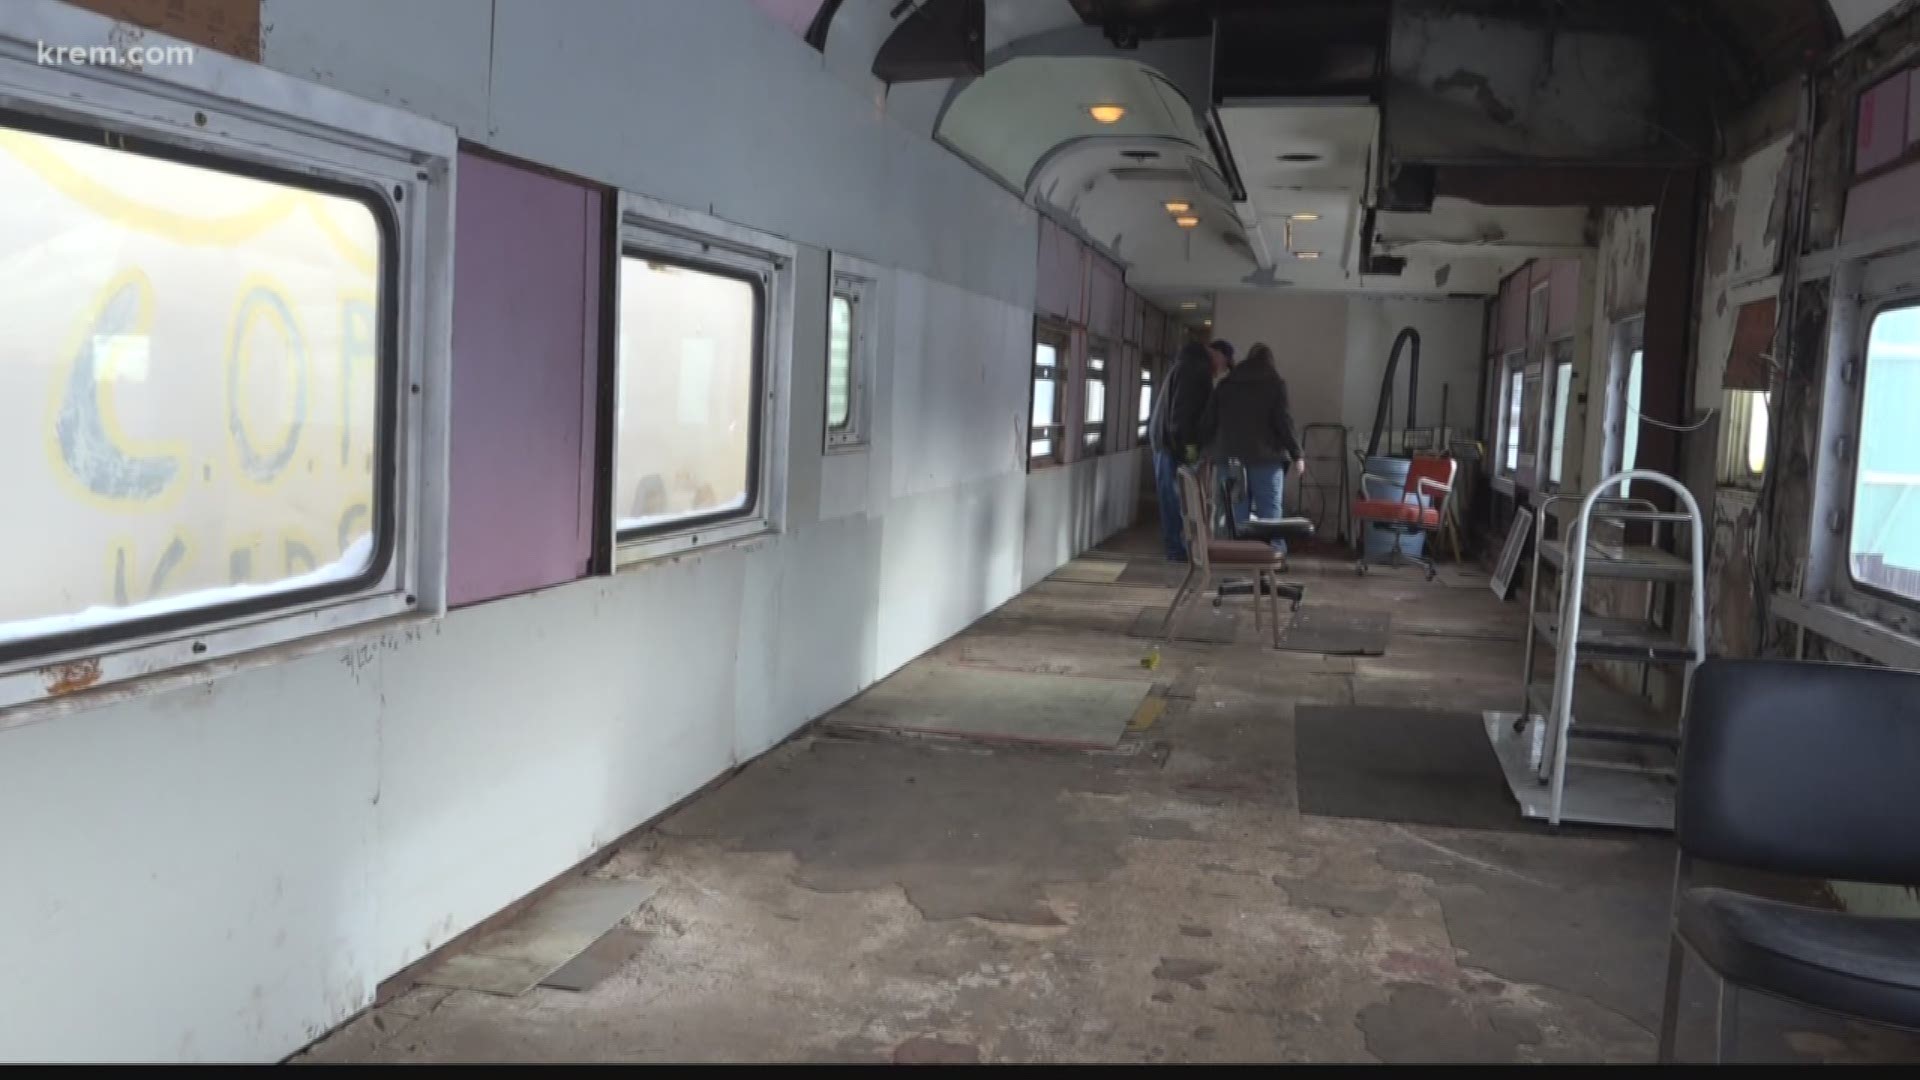 The Hillyard Heritage Museum has been trying to open for decades. Now they are working on refurbishing an old passenger train car to be open as an exhibit.